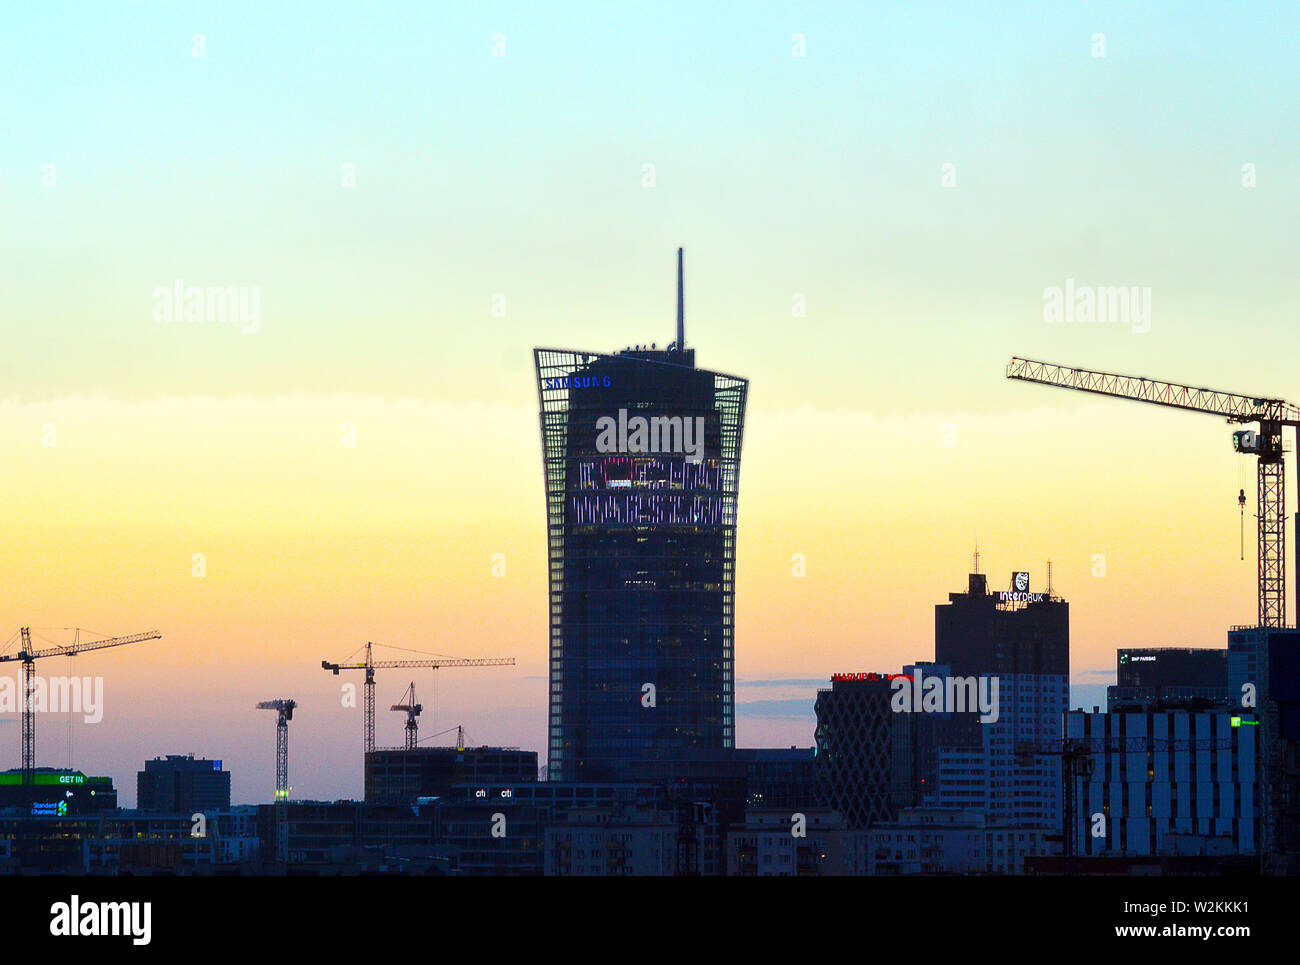 WARSAW, POLAND - 15 APRIL 2019: Dusk falls on the city and the 'kocham warszawe' (I love Warsaw) display lights up on the Samsung Tower Stock Photo